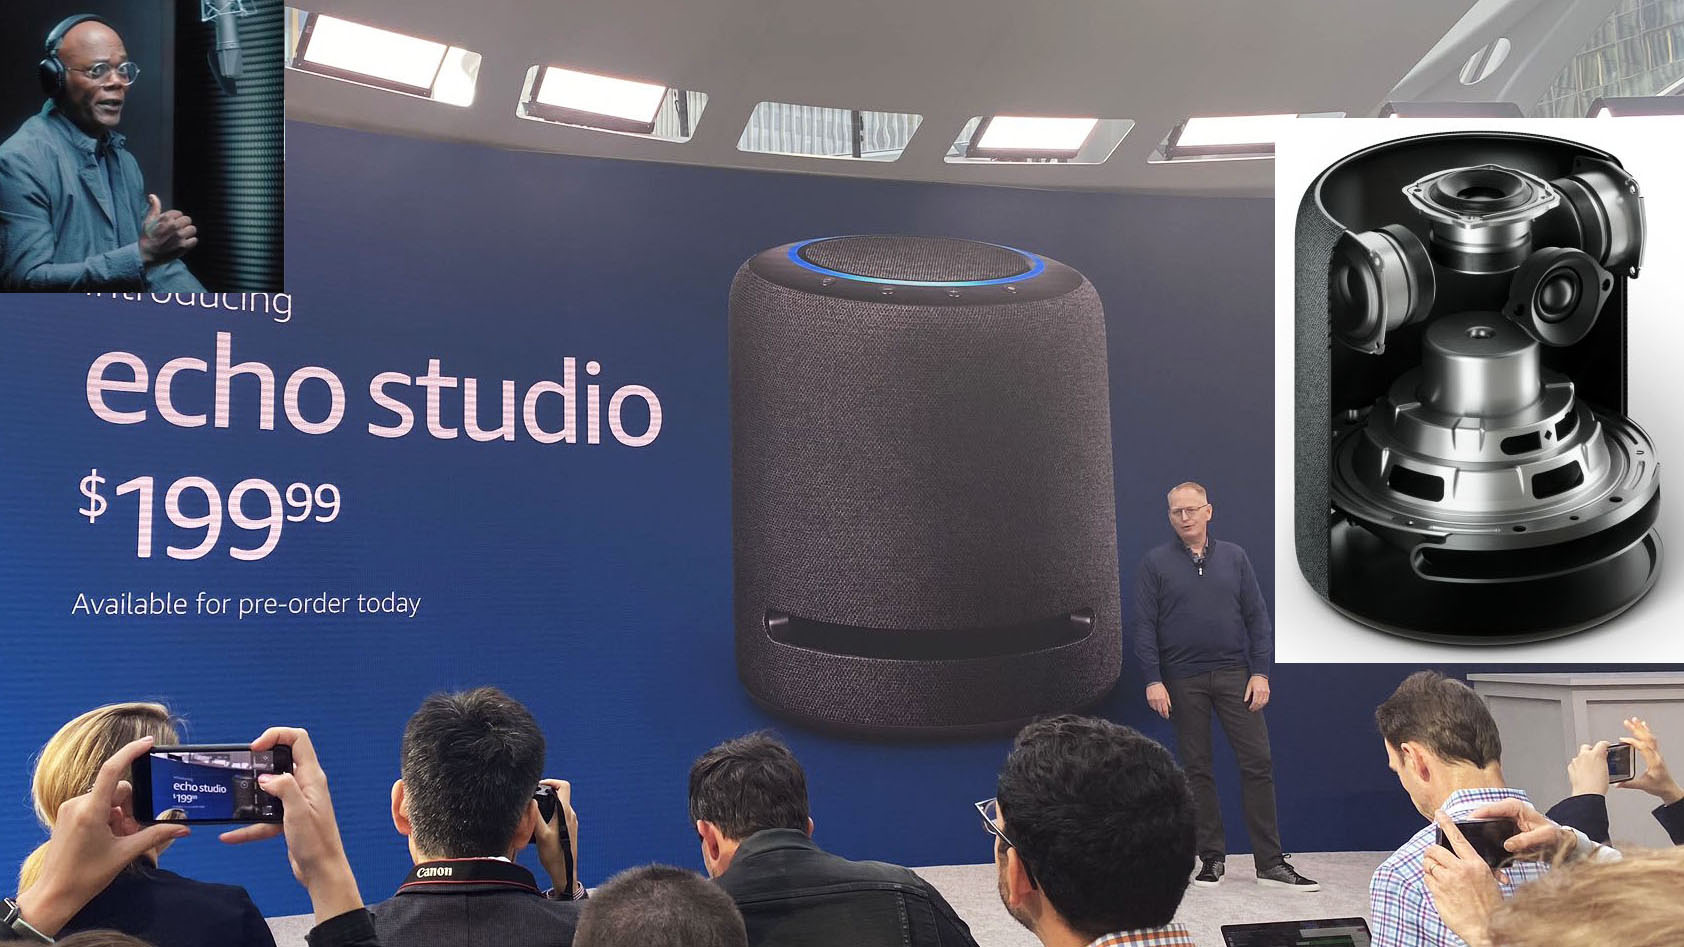 The news was announced at an Amazon event in Seattle studio speakers to use Alexa.